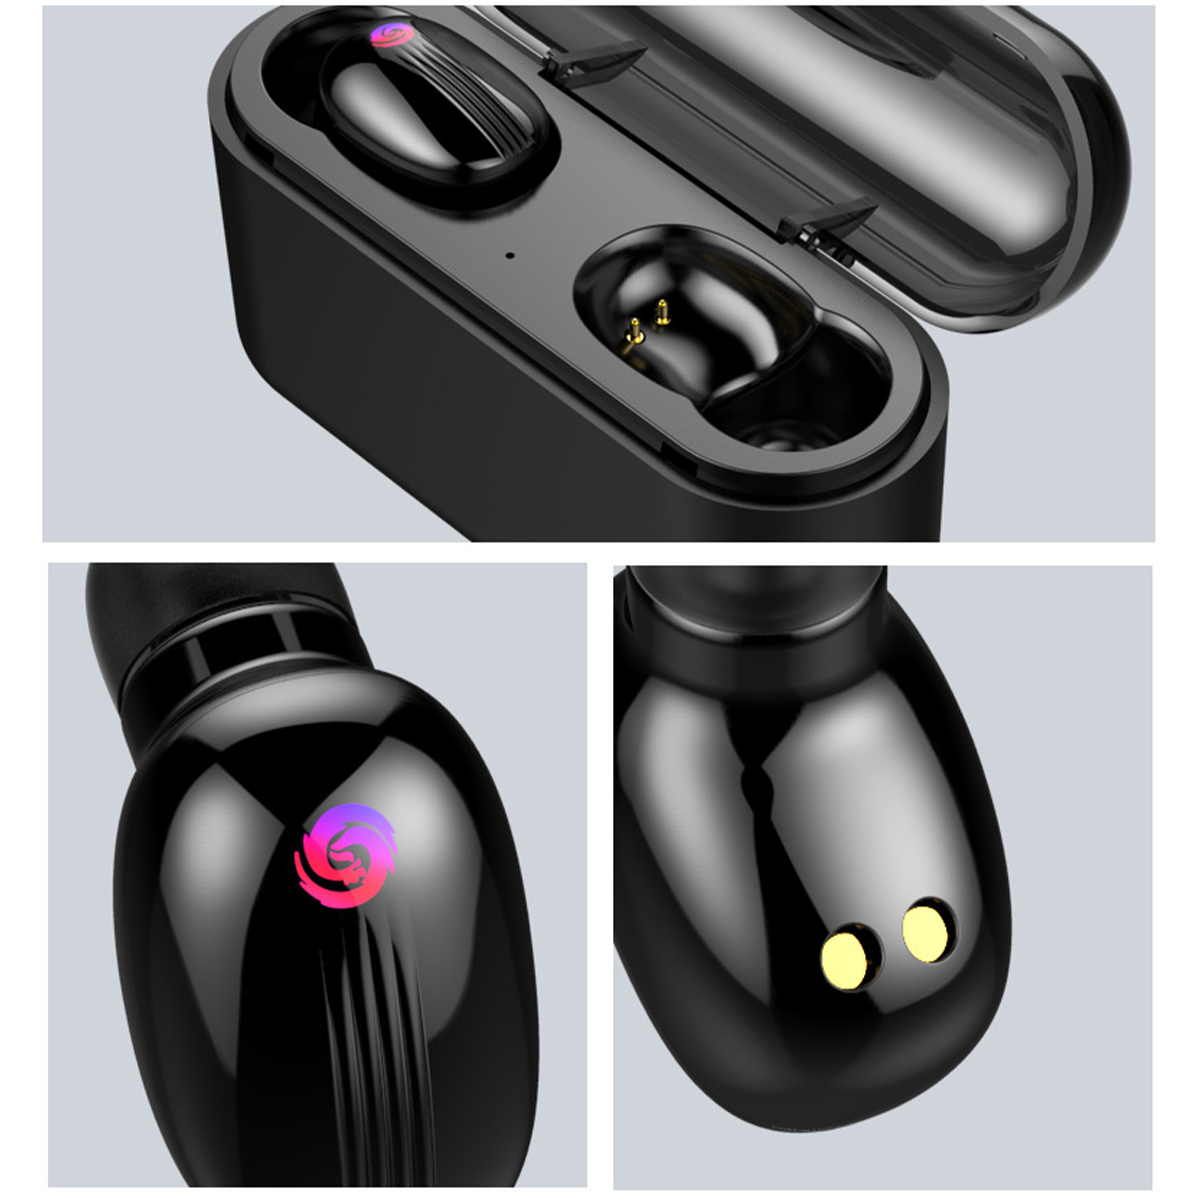 X2-Invisible-Wireless-Stereo-Earbuds-bluetooth-50-Smart-Touch-IPX6-Waterproof-Binaural-TWS-Earphone--1518358-10